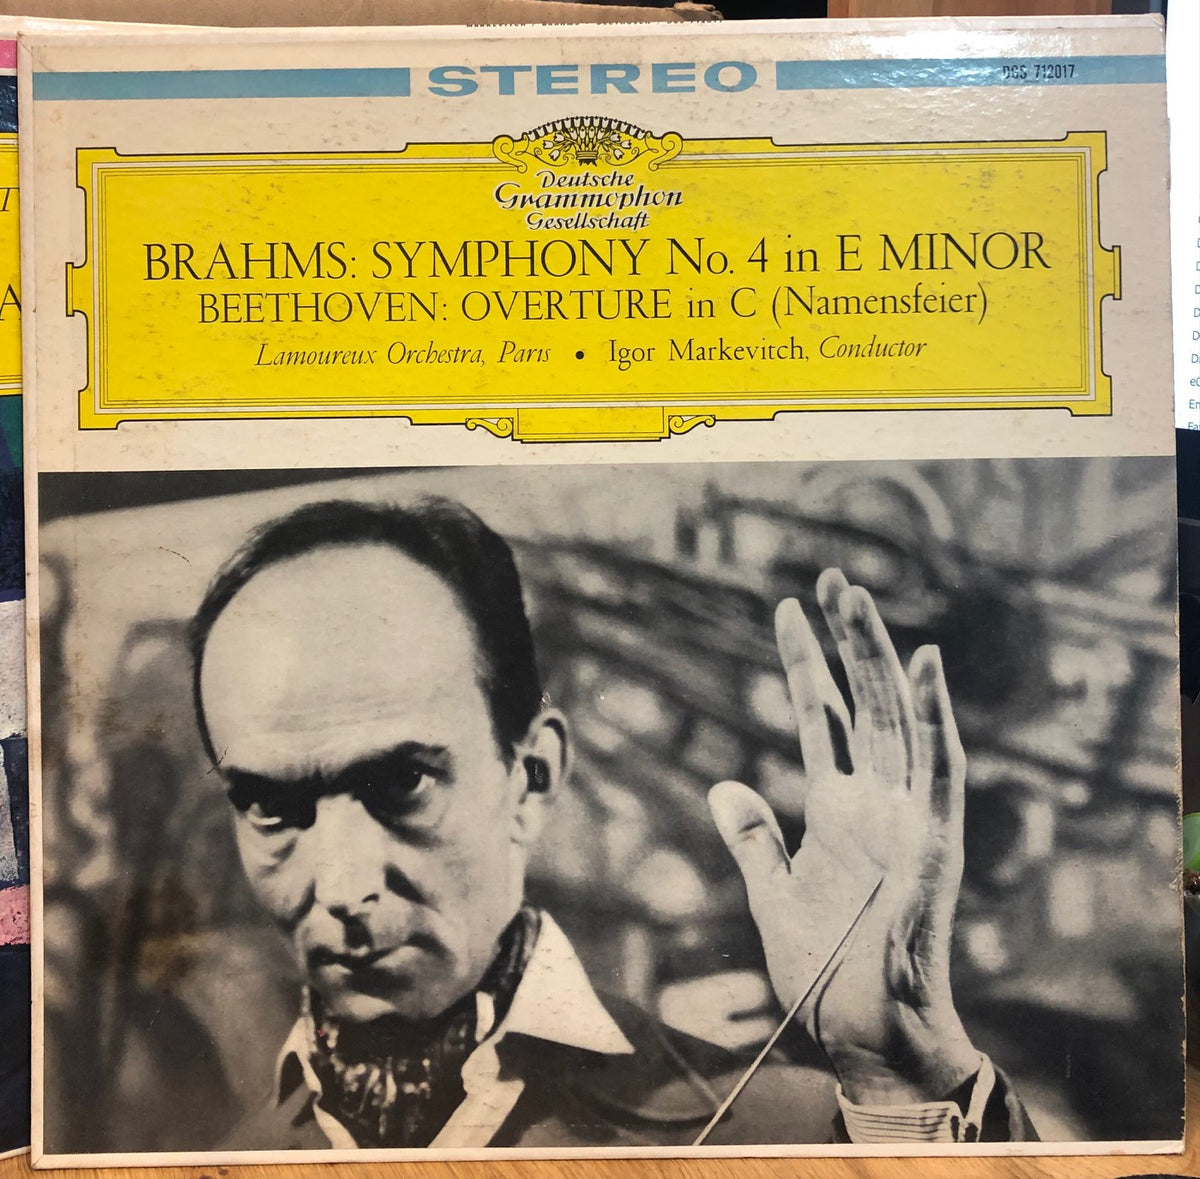 Markevitch - Brahms Symphony No.4 / Beethoven Overture In C - VG+ LP Record  1959 Deutsche Grammophon USA Stereo Vinyl - Classical